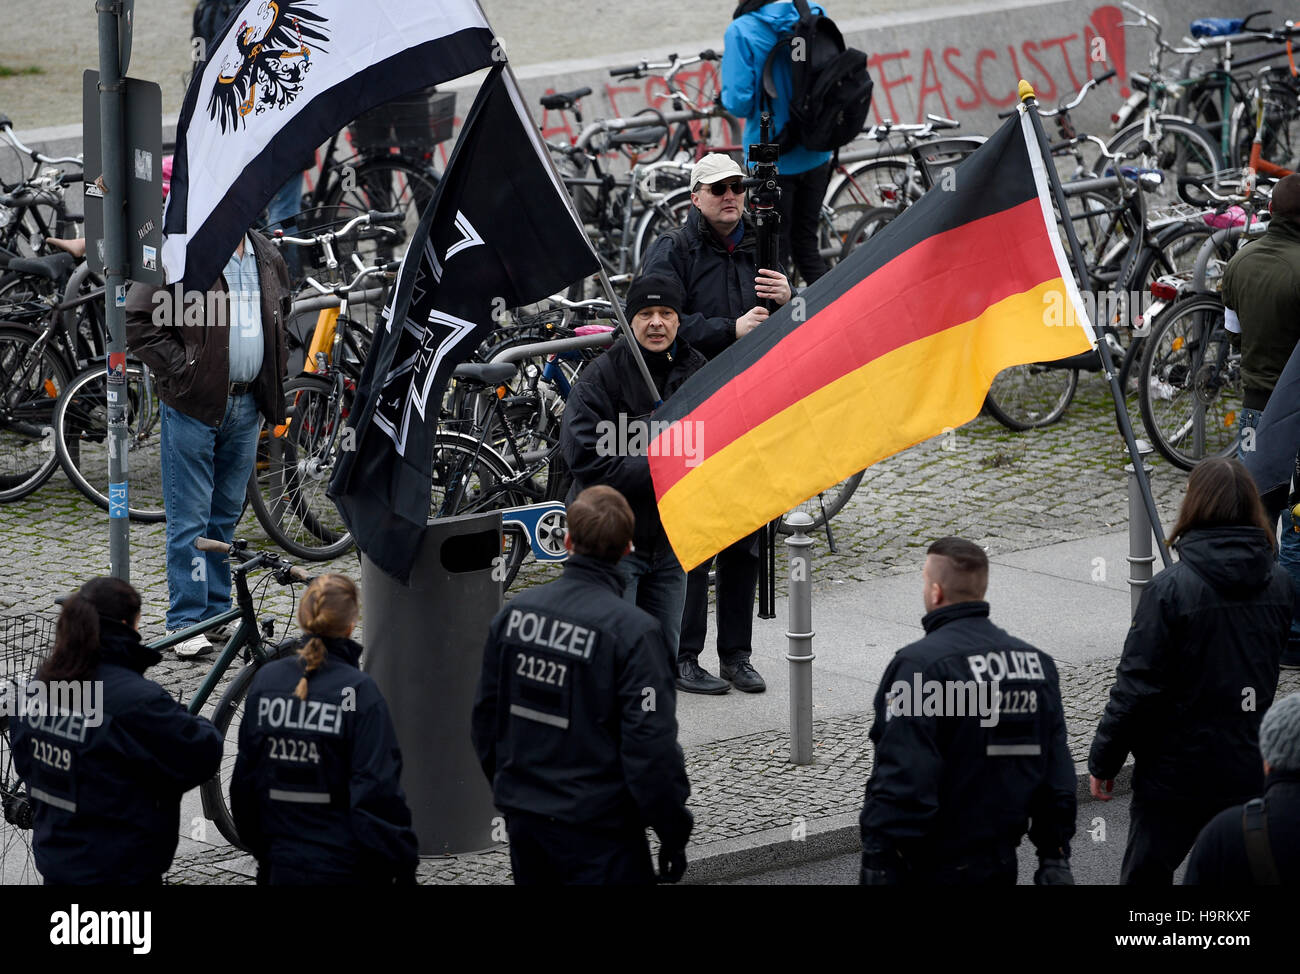 Berlin, Germany. 26th Nov, 2016. Participants in a demo by the Berlin offshoot of the Pegida movement 'Baergida' are provented from moving further by police, in Berlin, Germany, 26 November 2016. Several dozen people gathered for a demonstration. Photo: Rainer Jensen/dpa/Alamy Live News Stock Photo